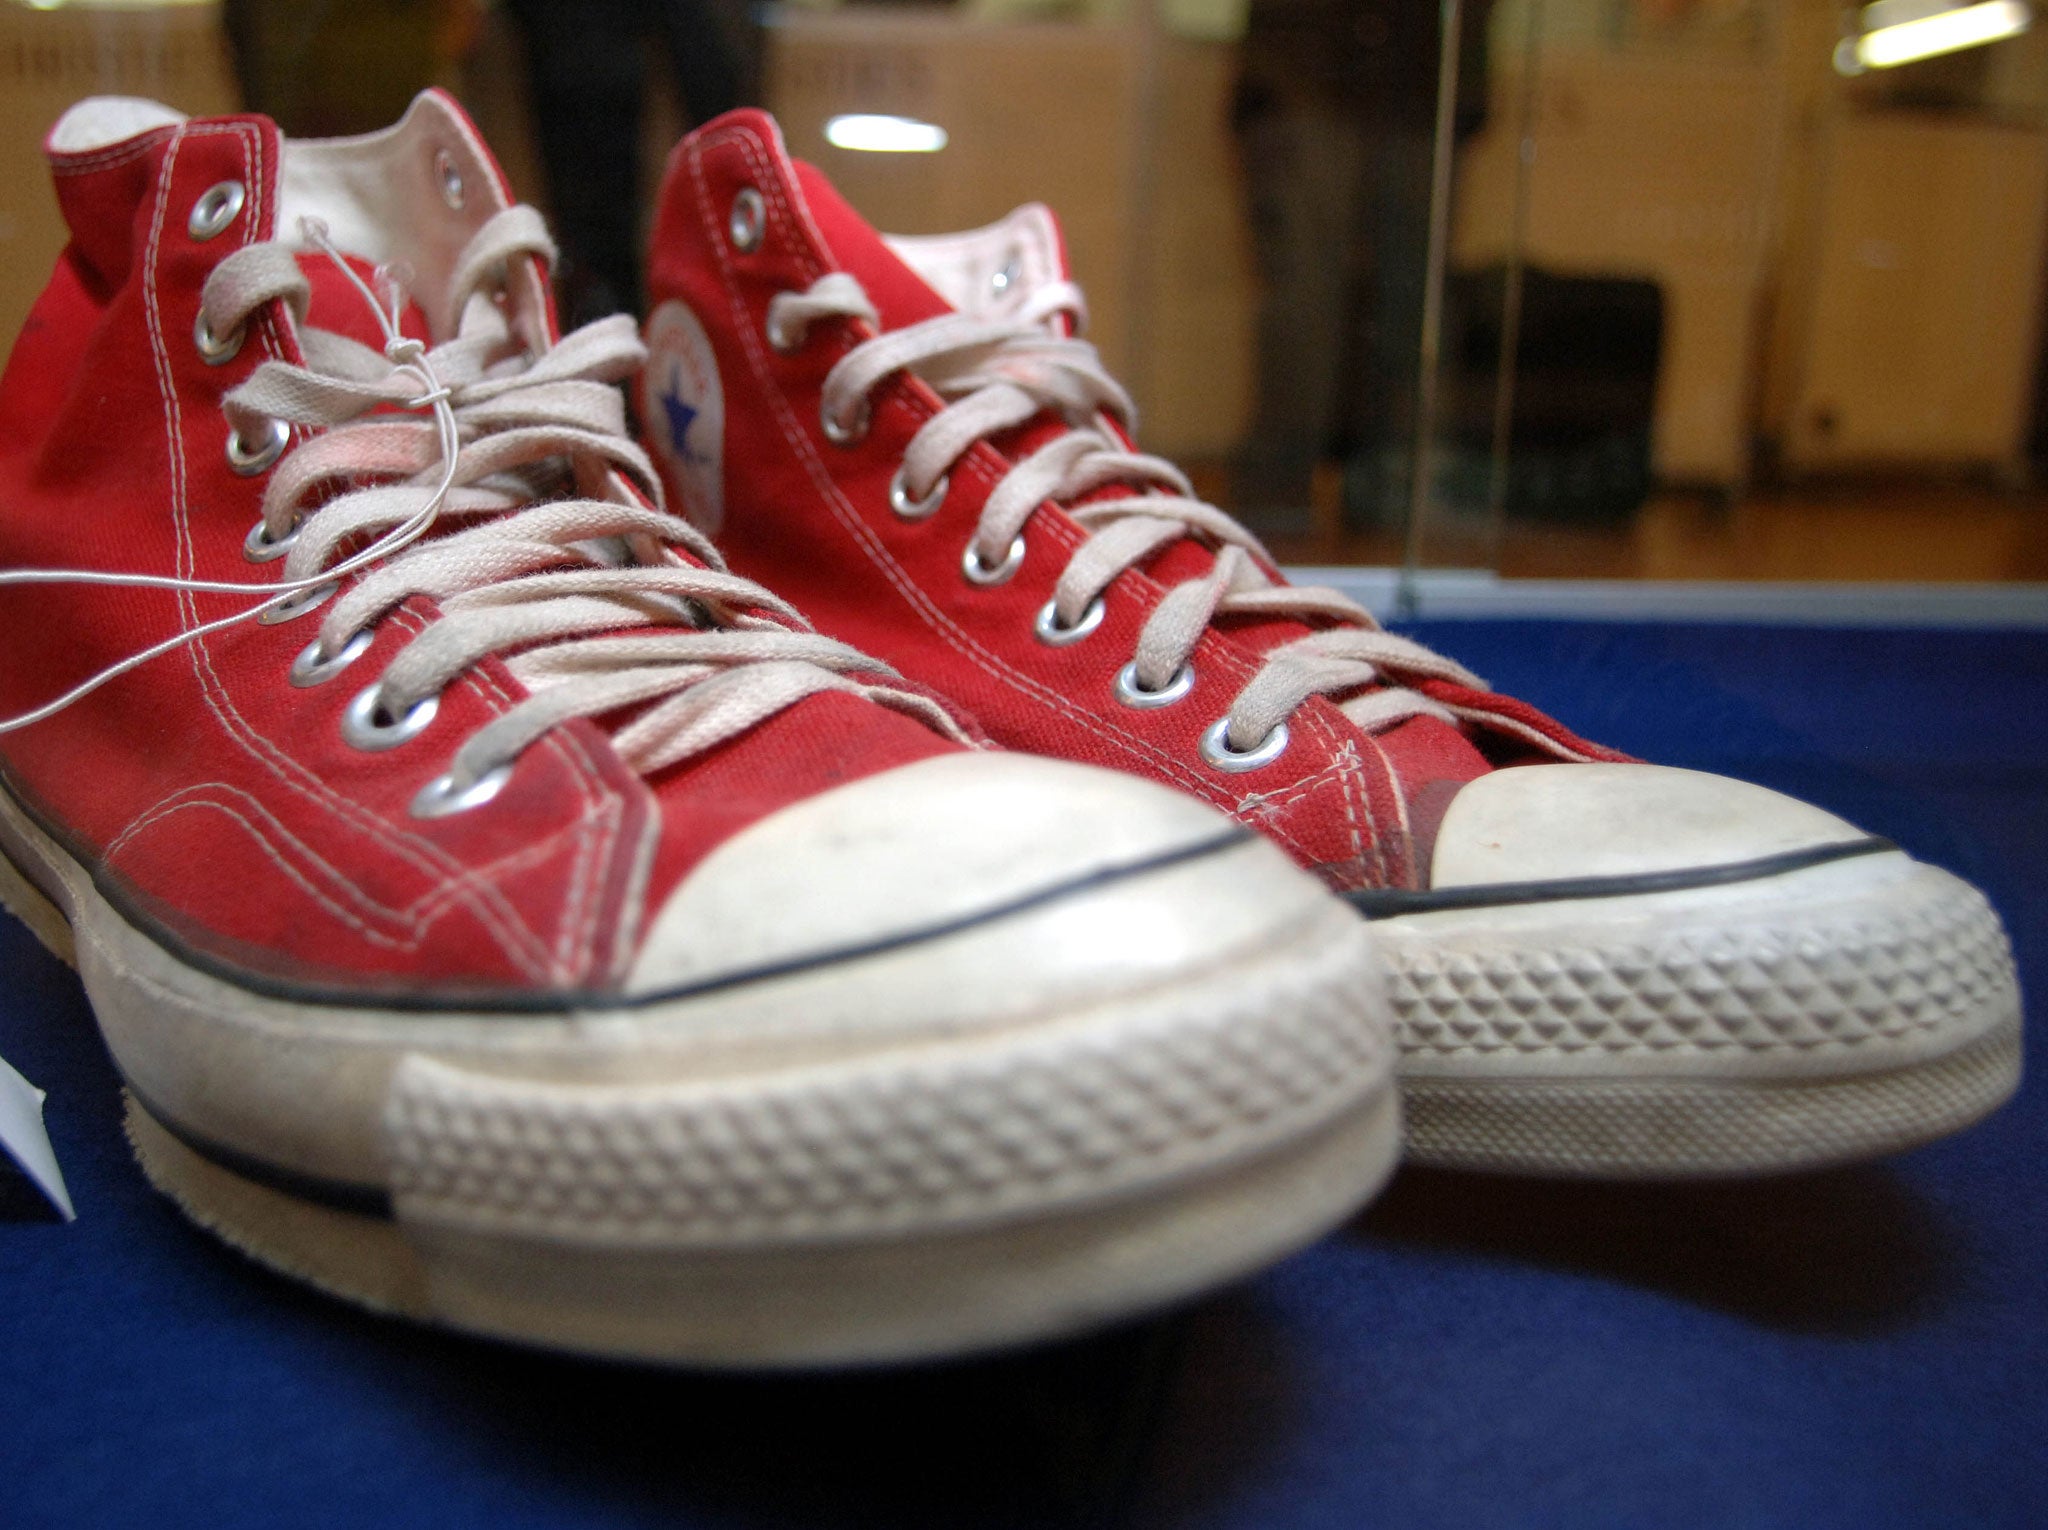 Converse All Stars trainers worn by Keith Moon of The Who are displayed at Christies before auction on April 26, 2007 in London, England.